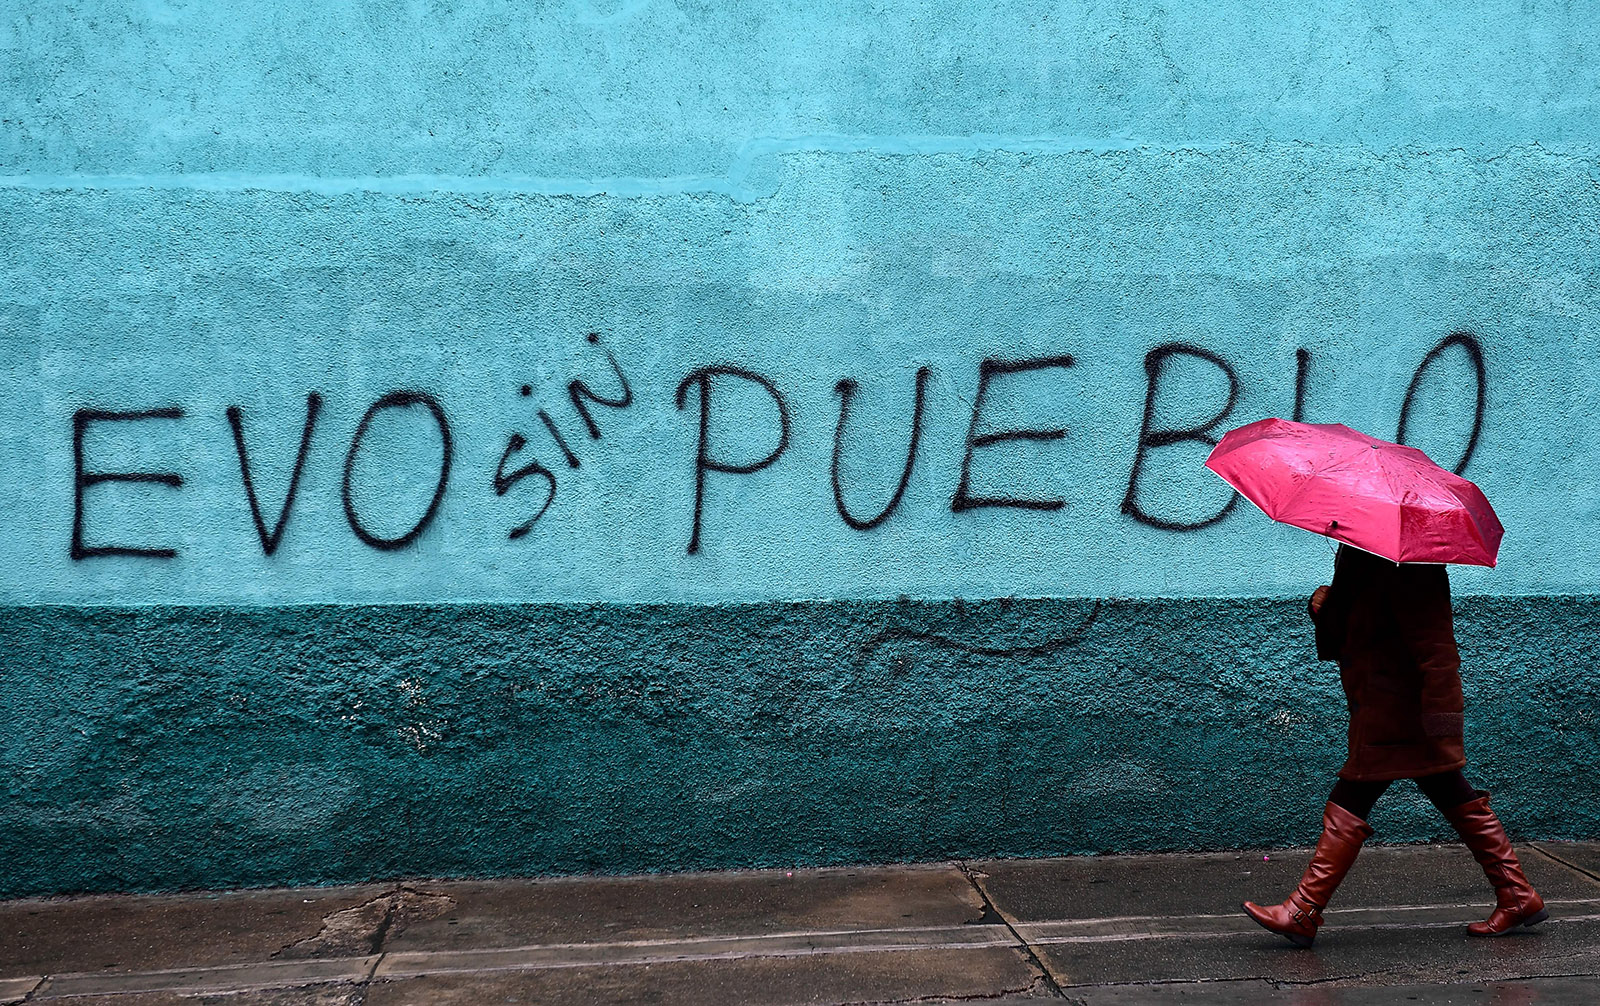 Graffiti reading “Evo without the people,” following the resignation of of Bolivian President Evo Morales after a disputed election result in October, La Paz, Bolivia, November 11, 2019